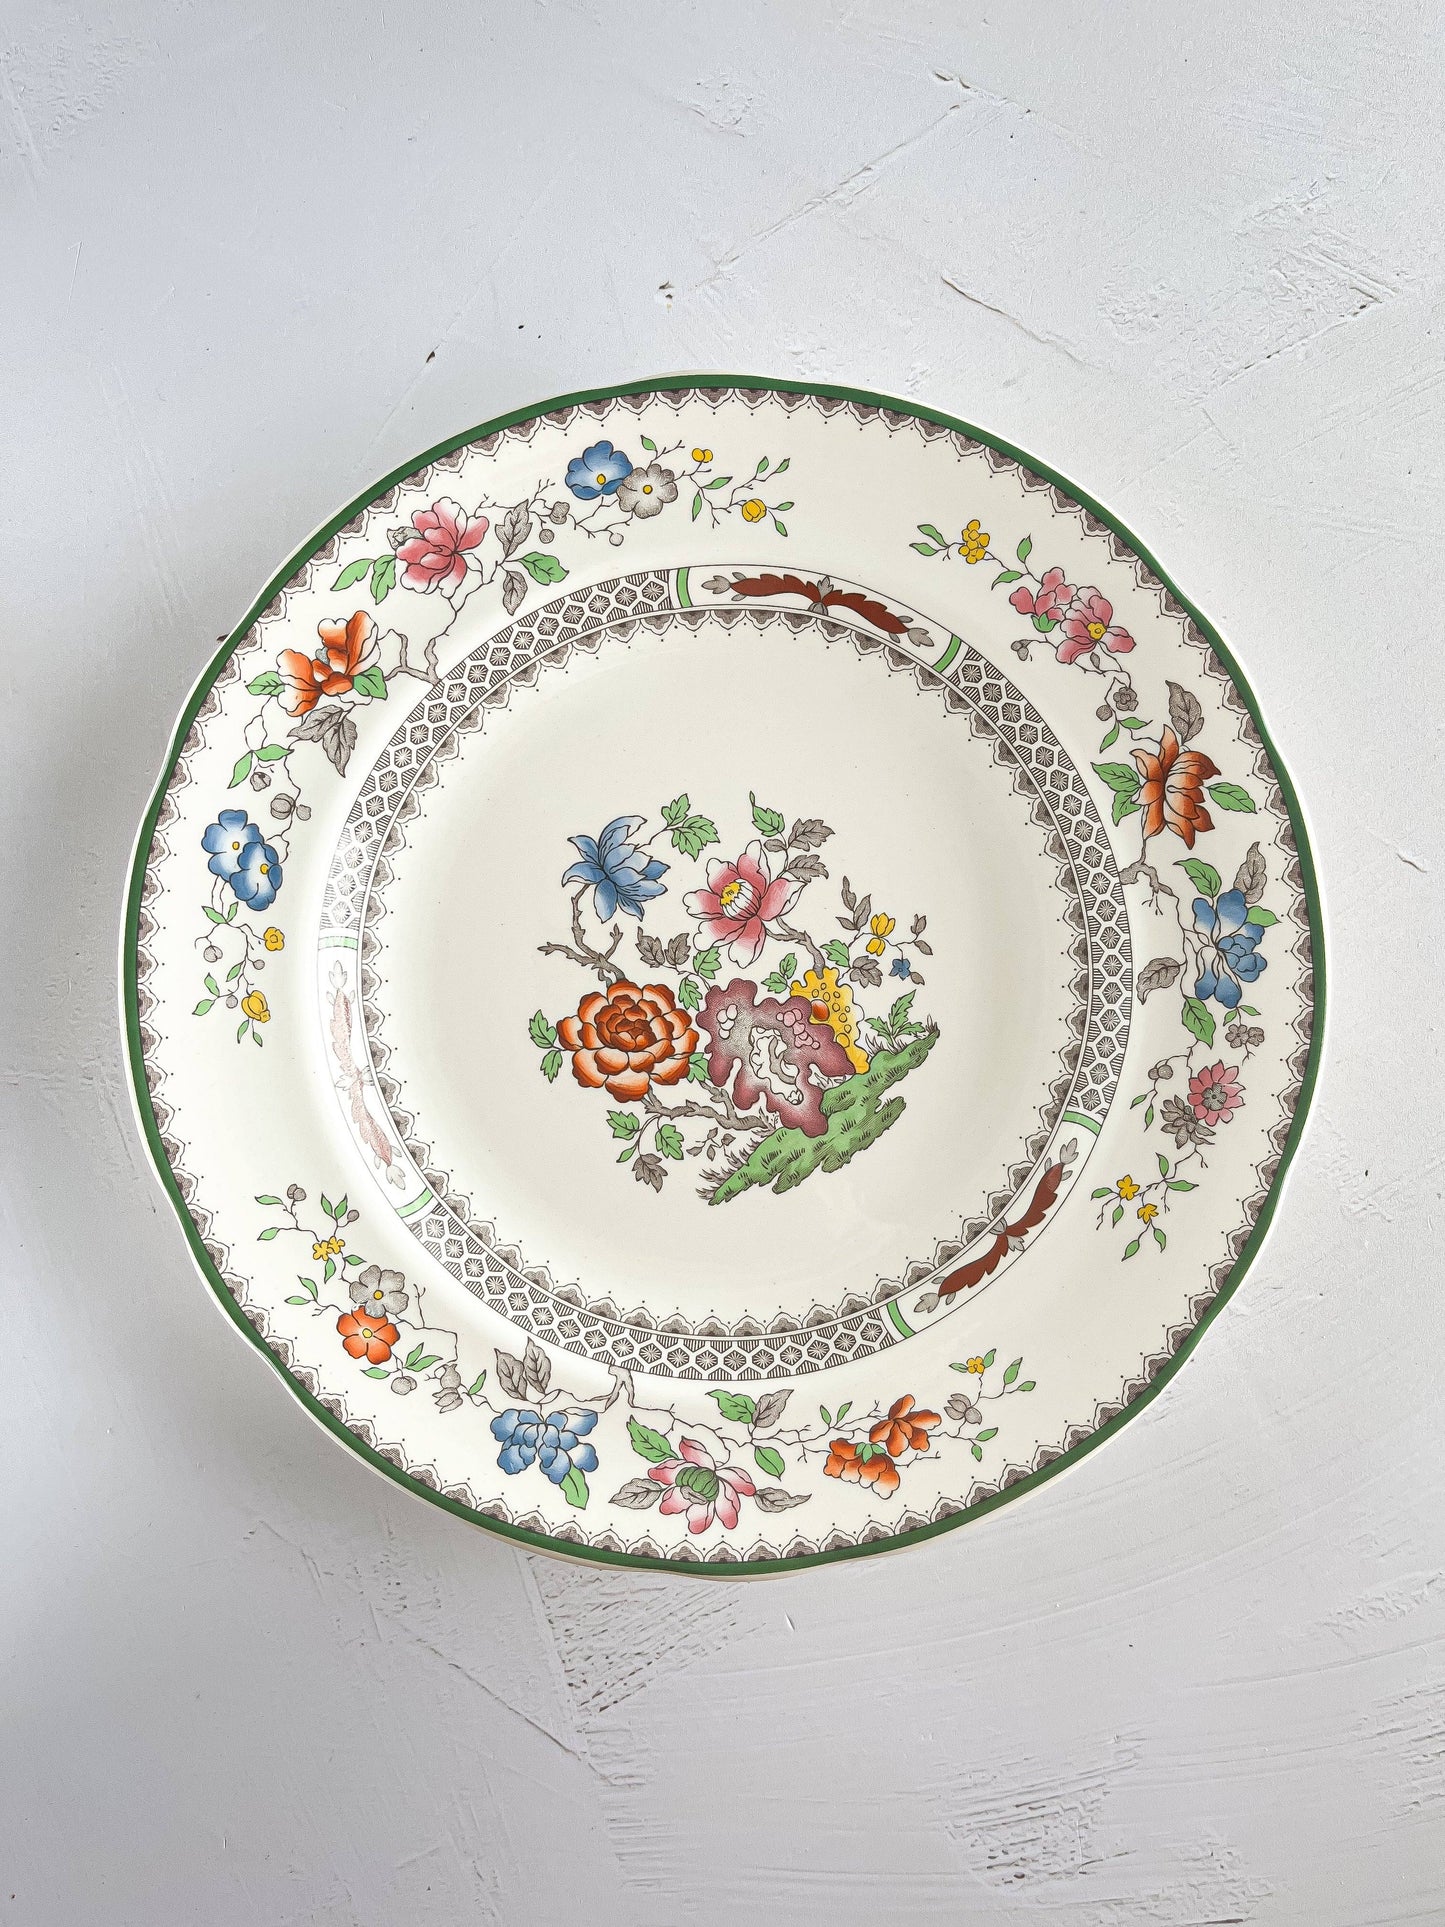 Spode Collection Bread & Butter Plate - 'Chinese Rose' Collection - SOSC Home